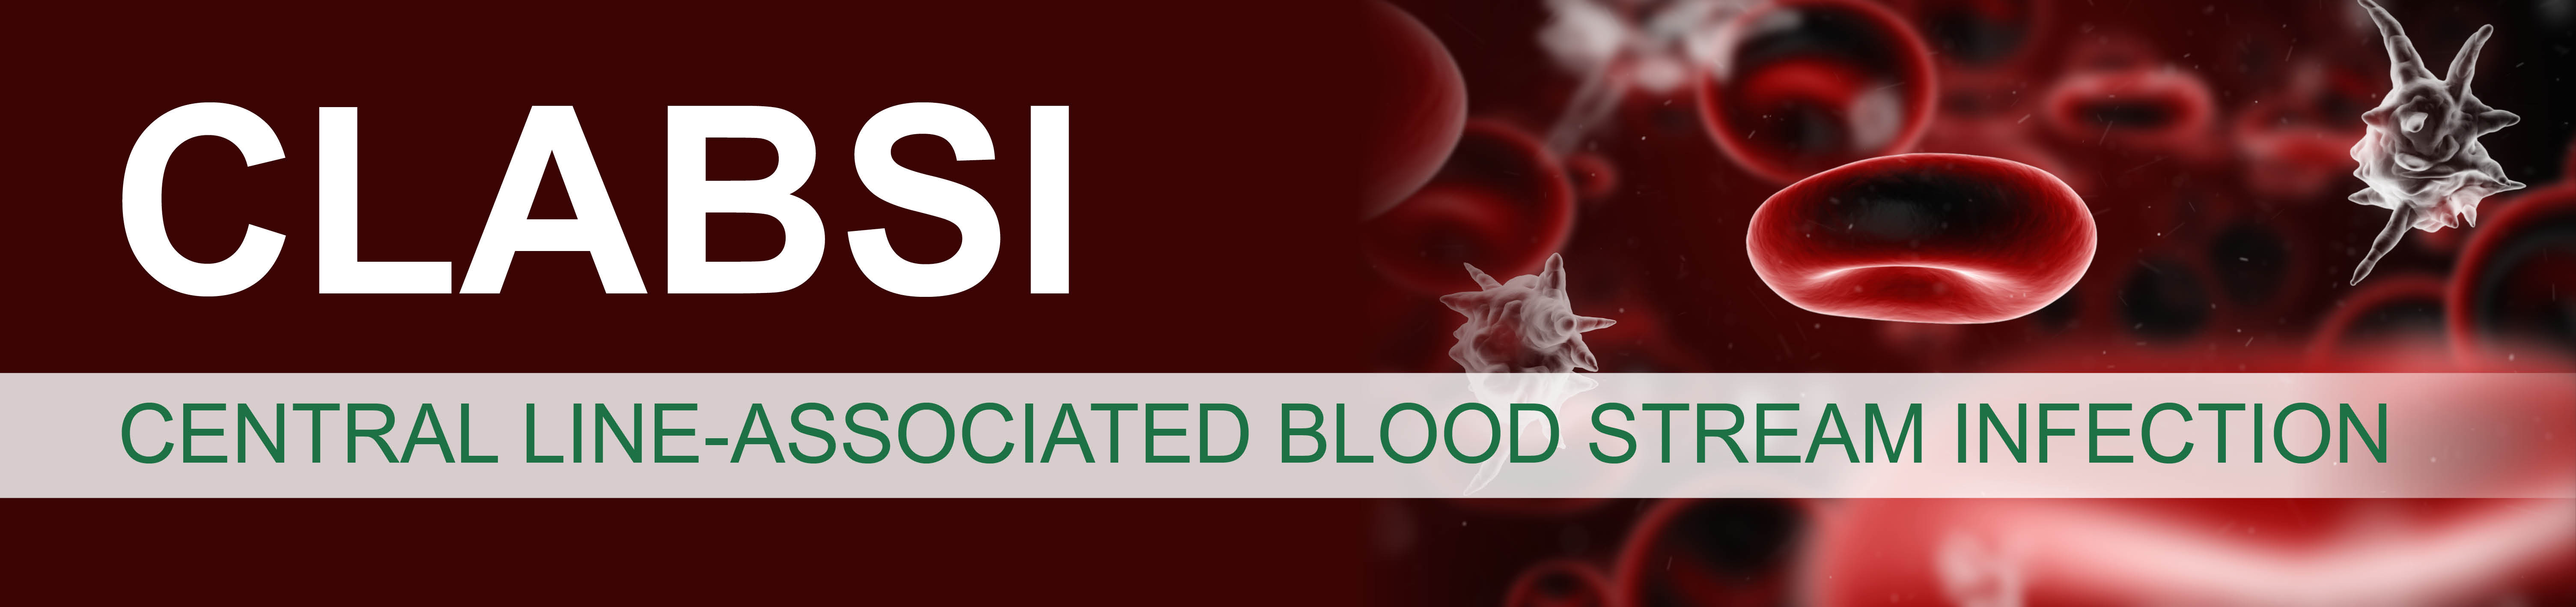 CLABSI: Central Line-Associated Blood Stream Infection